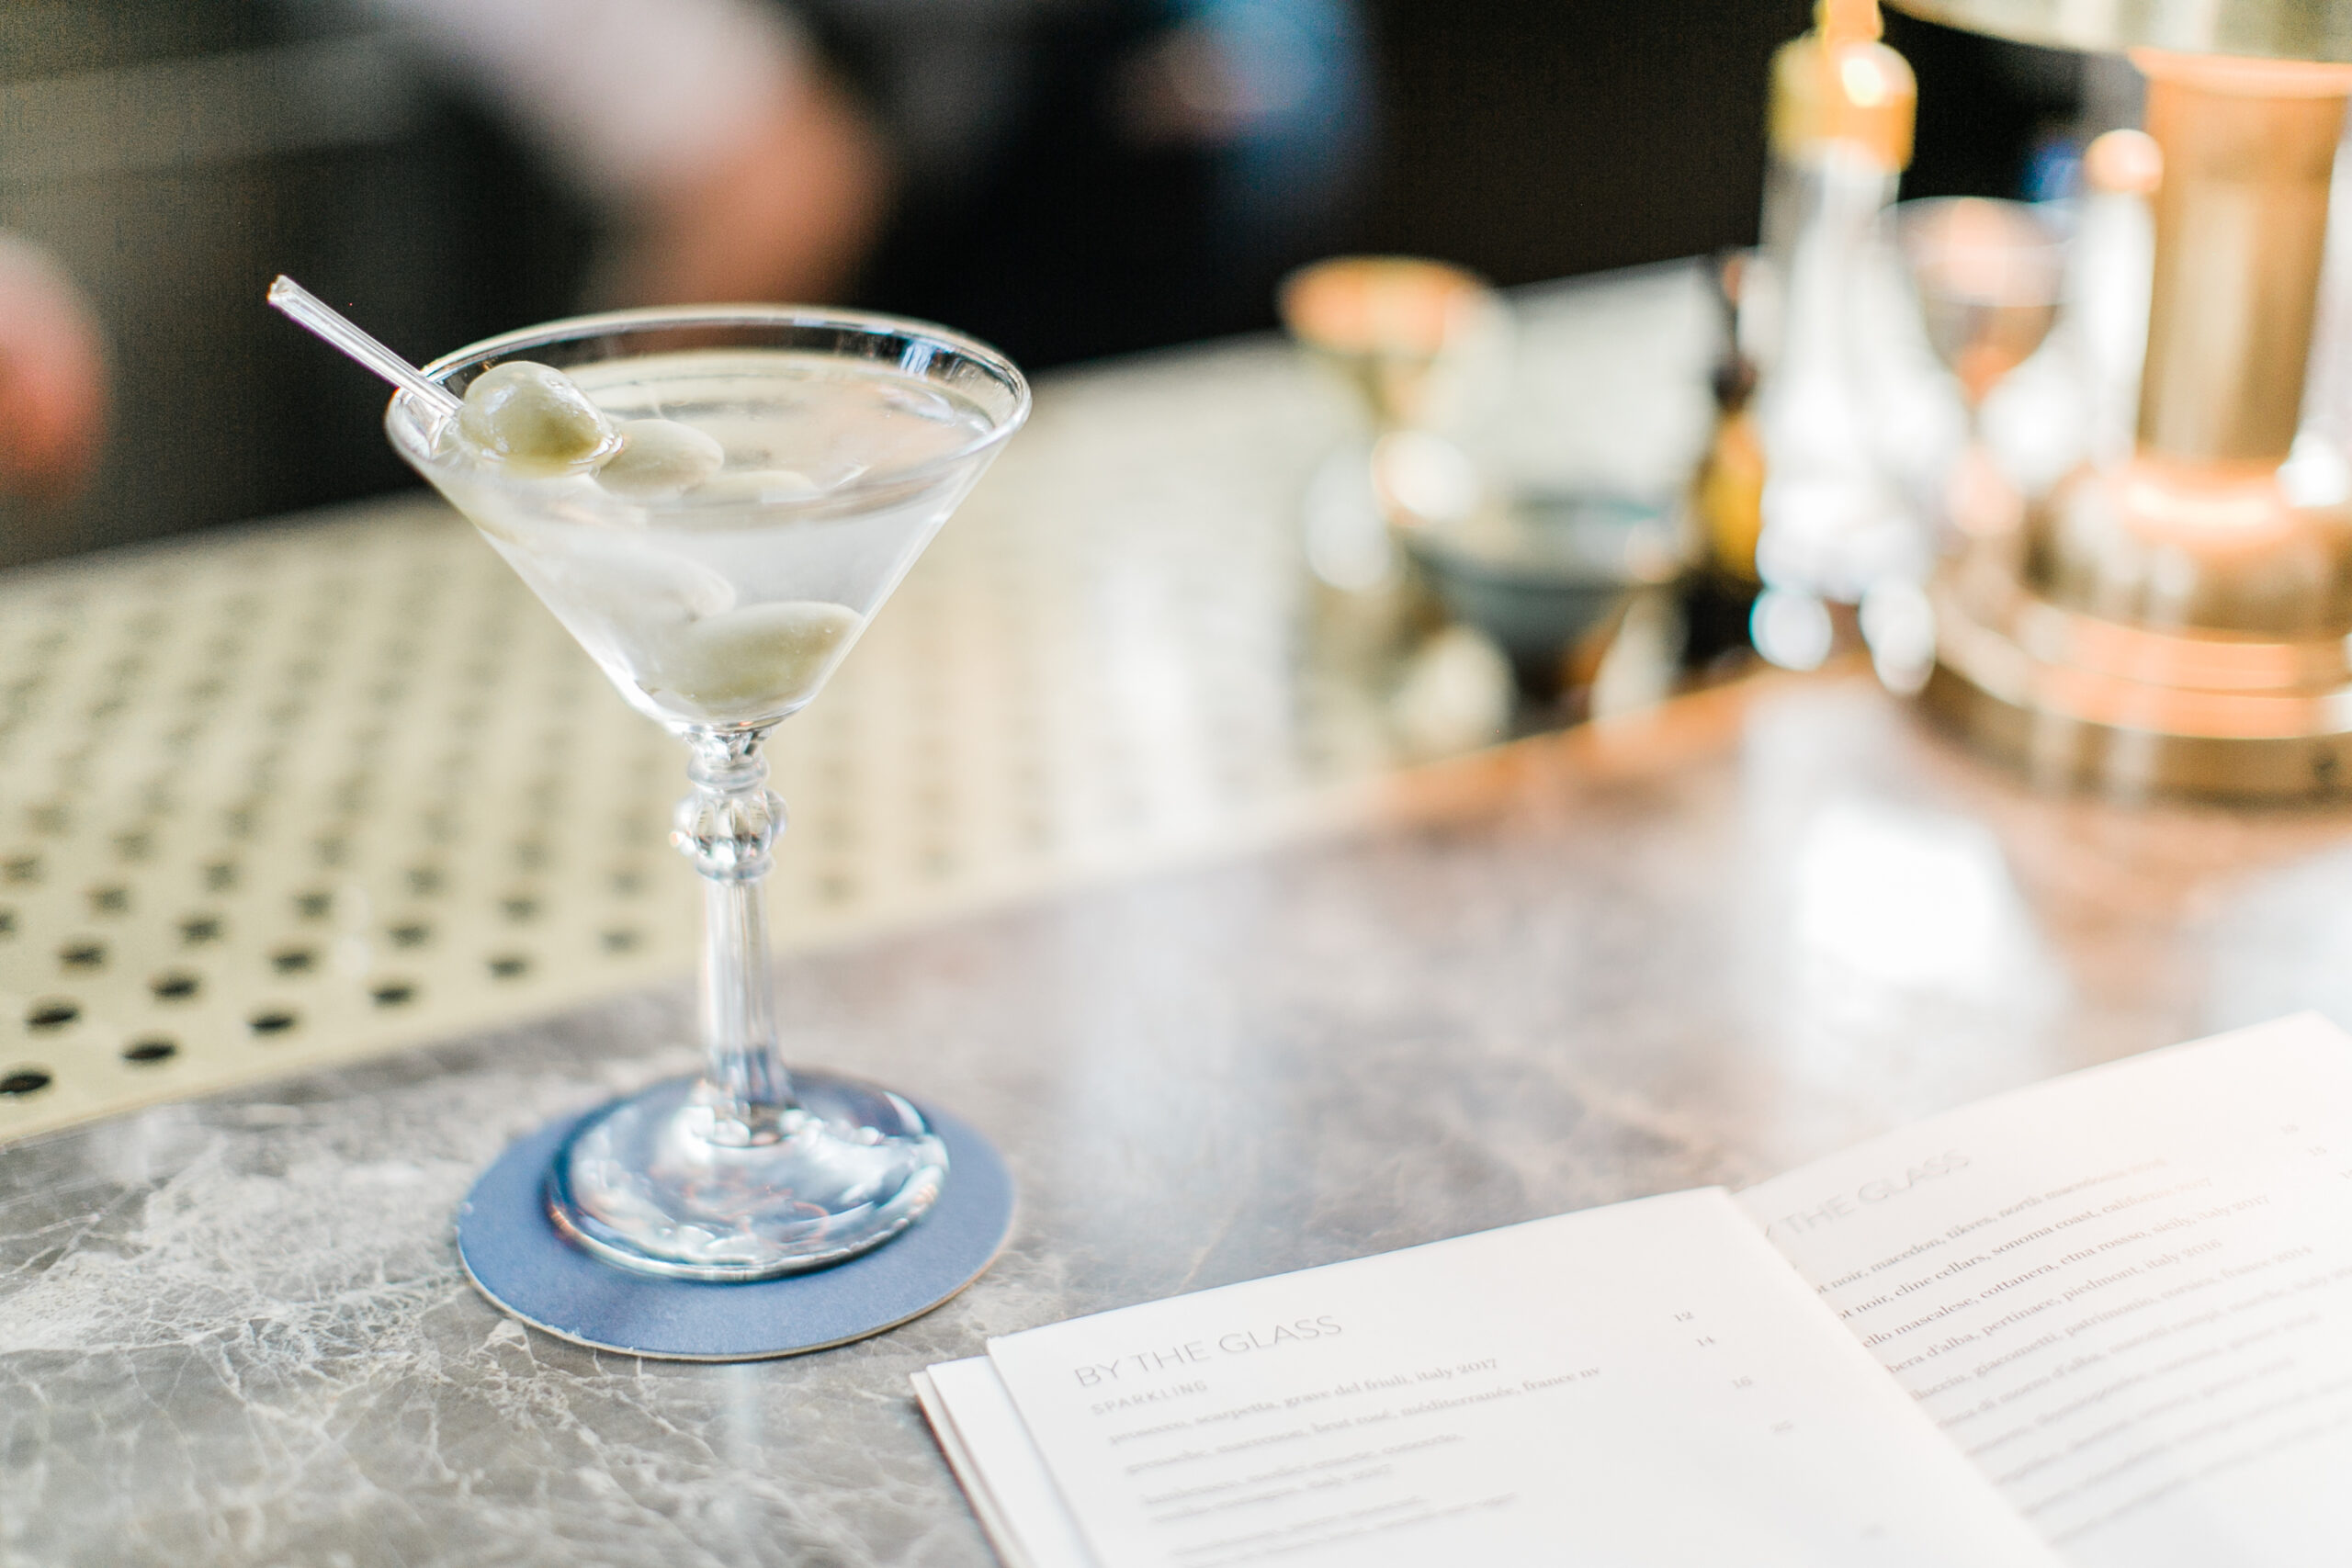 A martini with olives on a stirrer sits on a bar counter next to an open menu, offering the perfect moment for some quiet journaling.